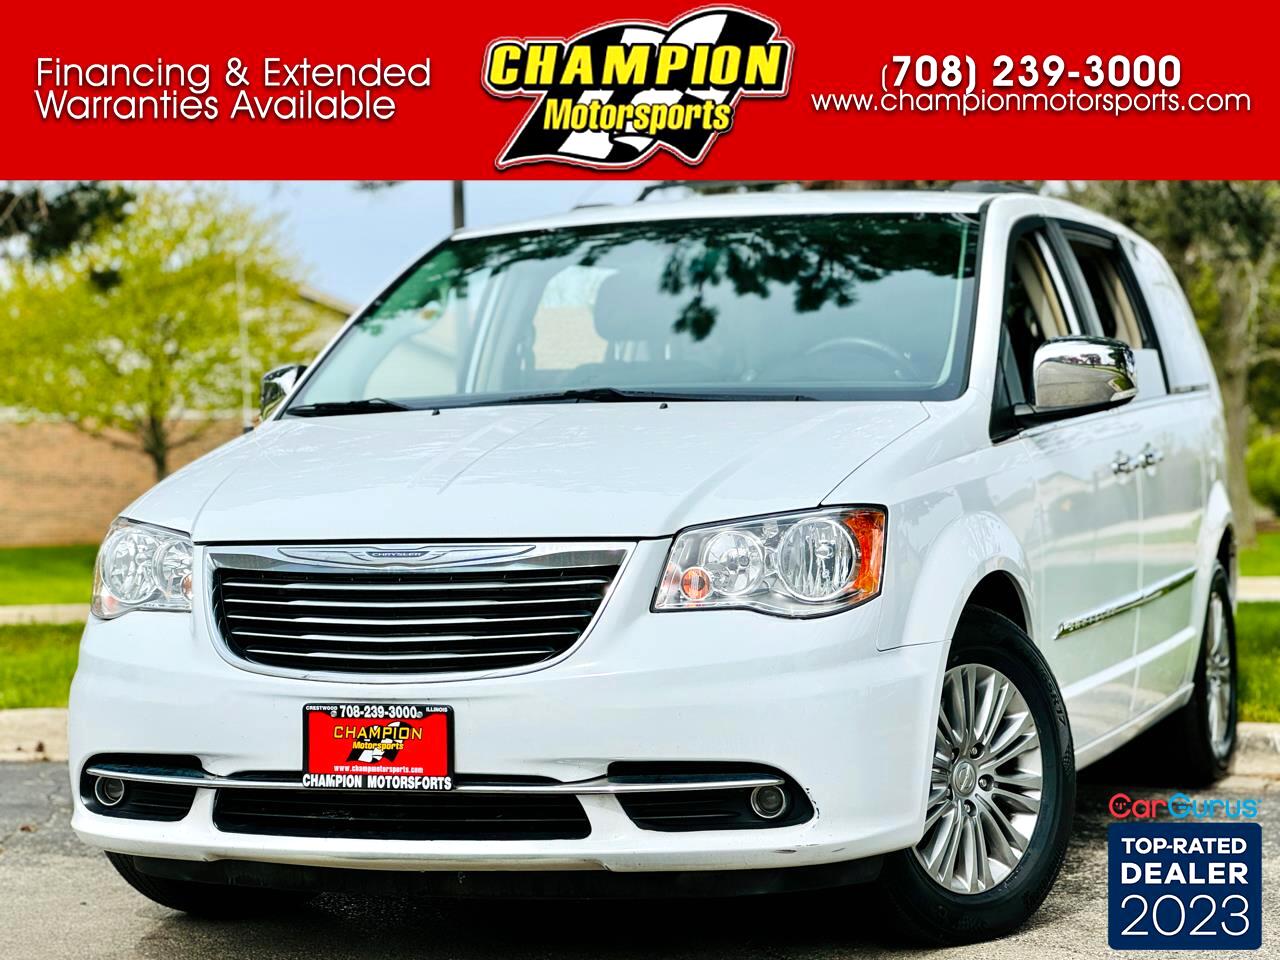 2016 Chrysler Town & Country 4dr Wgn Touring-L